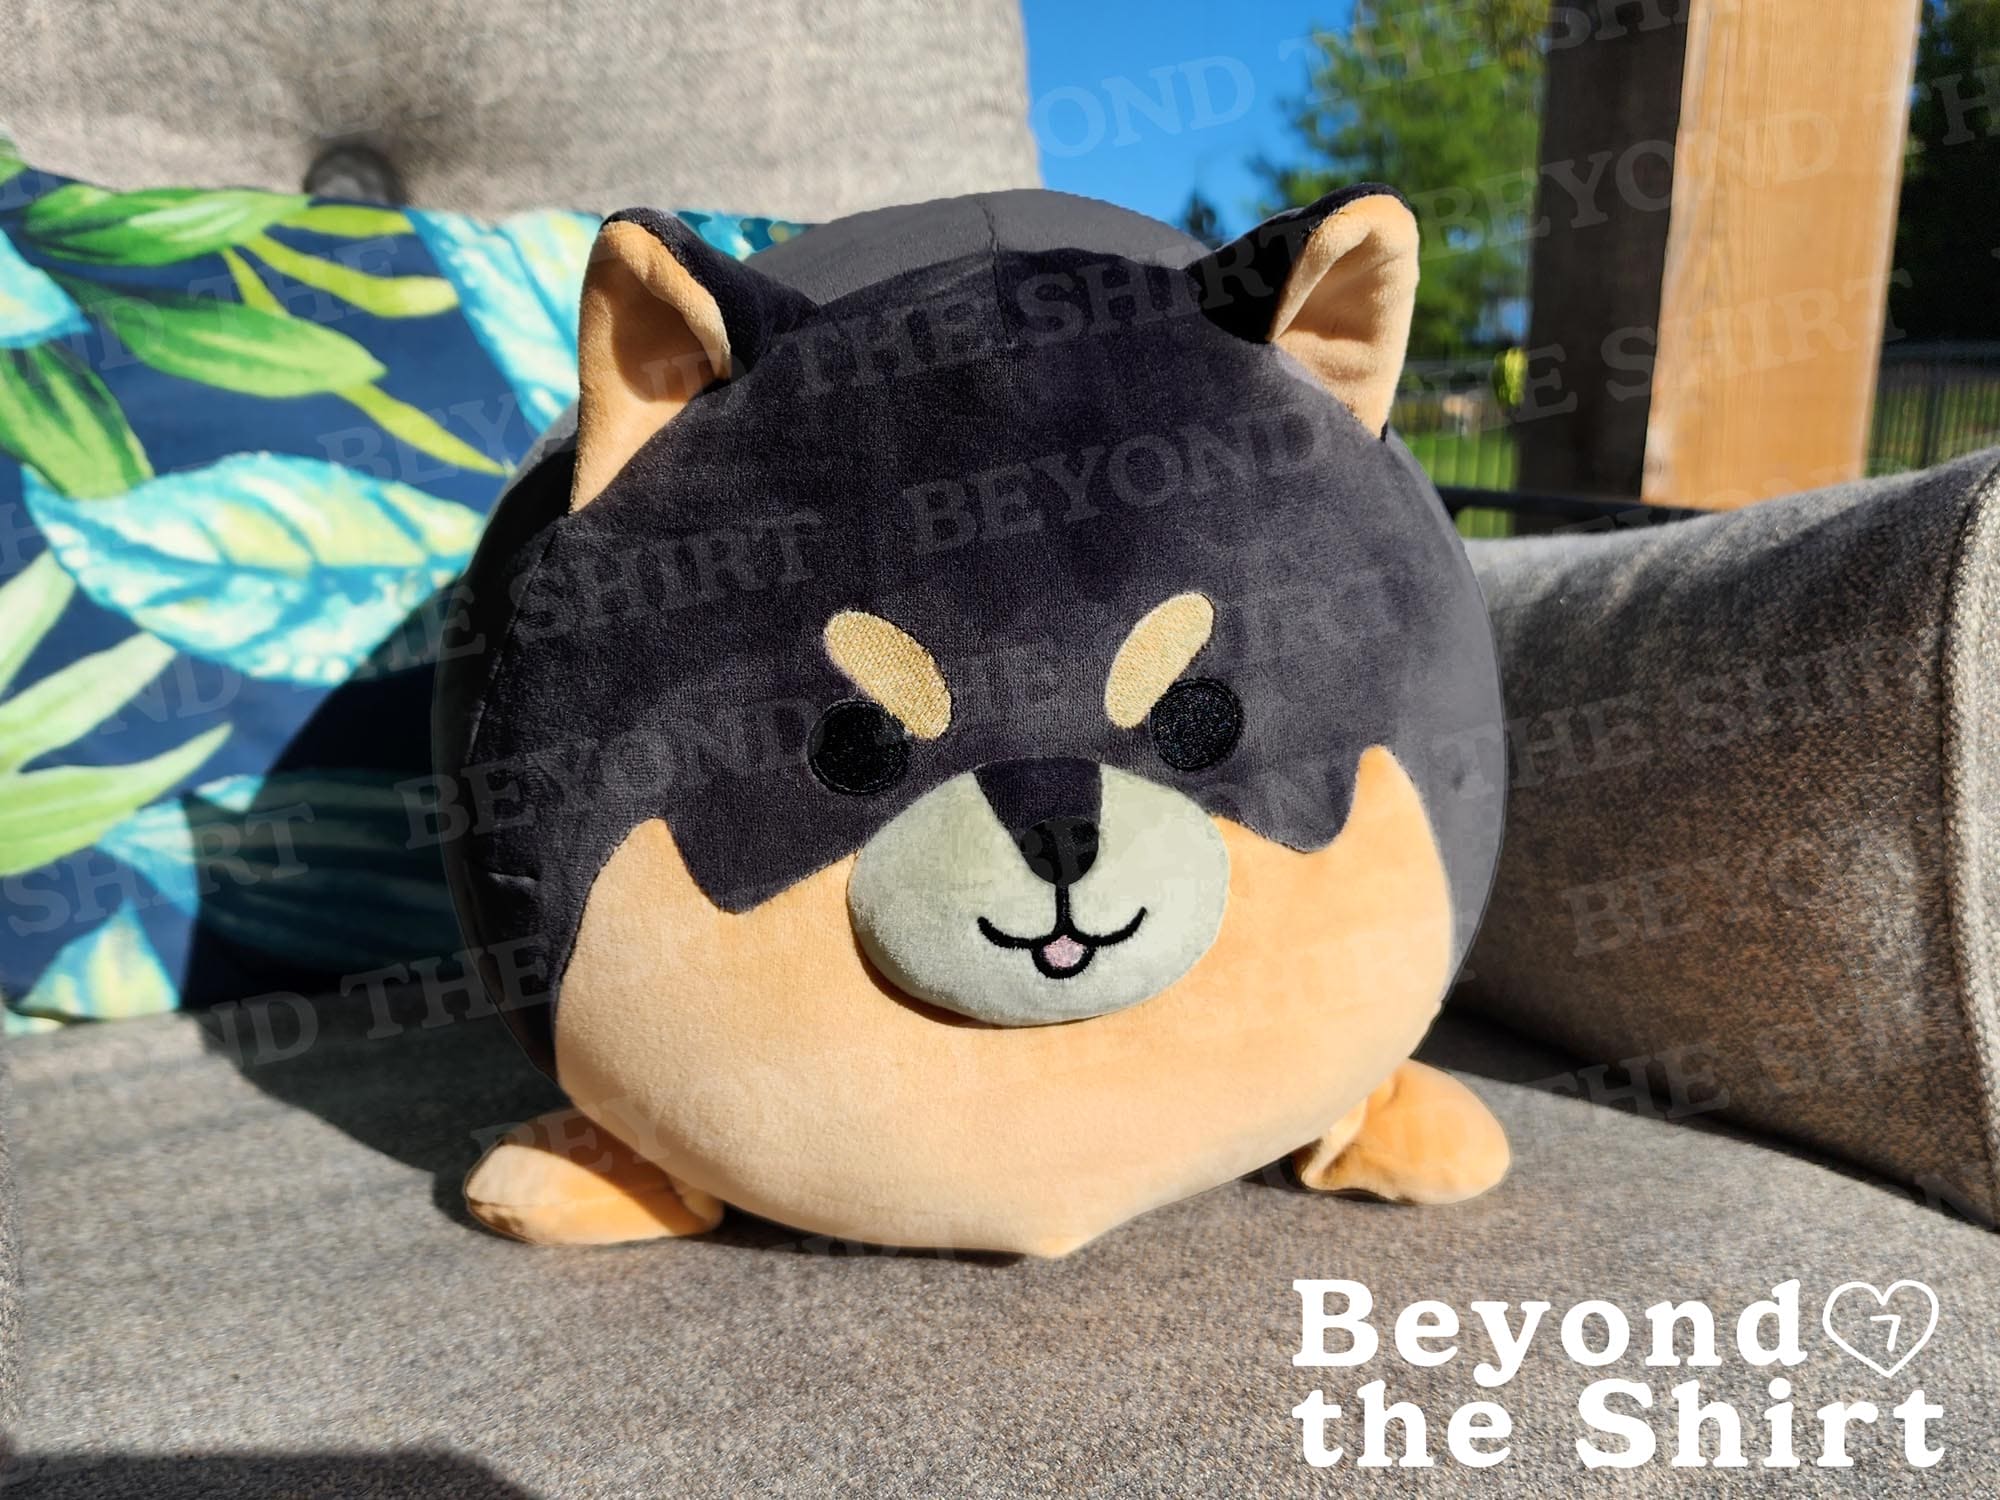 BTS Member Weighted Plushie - IN-STOCK